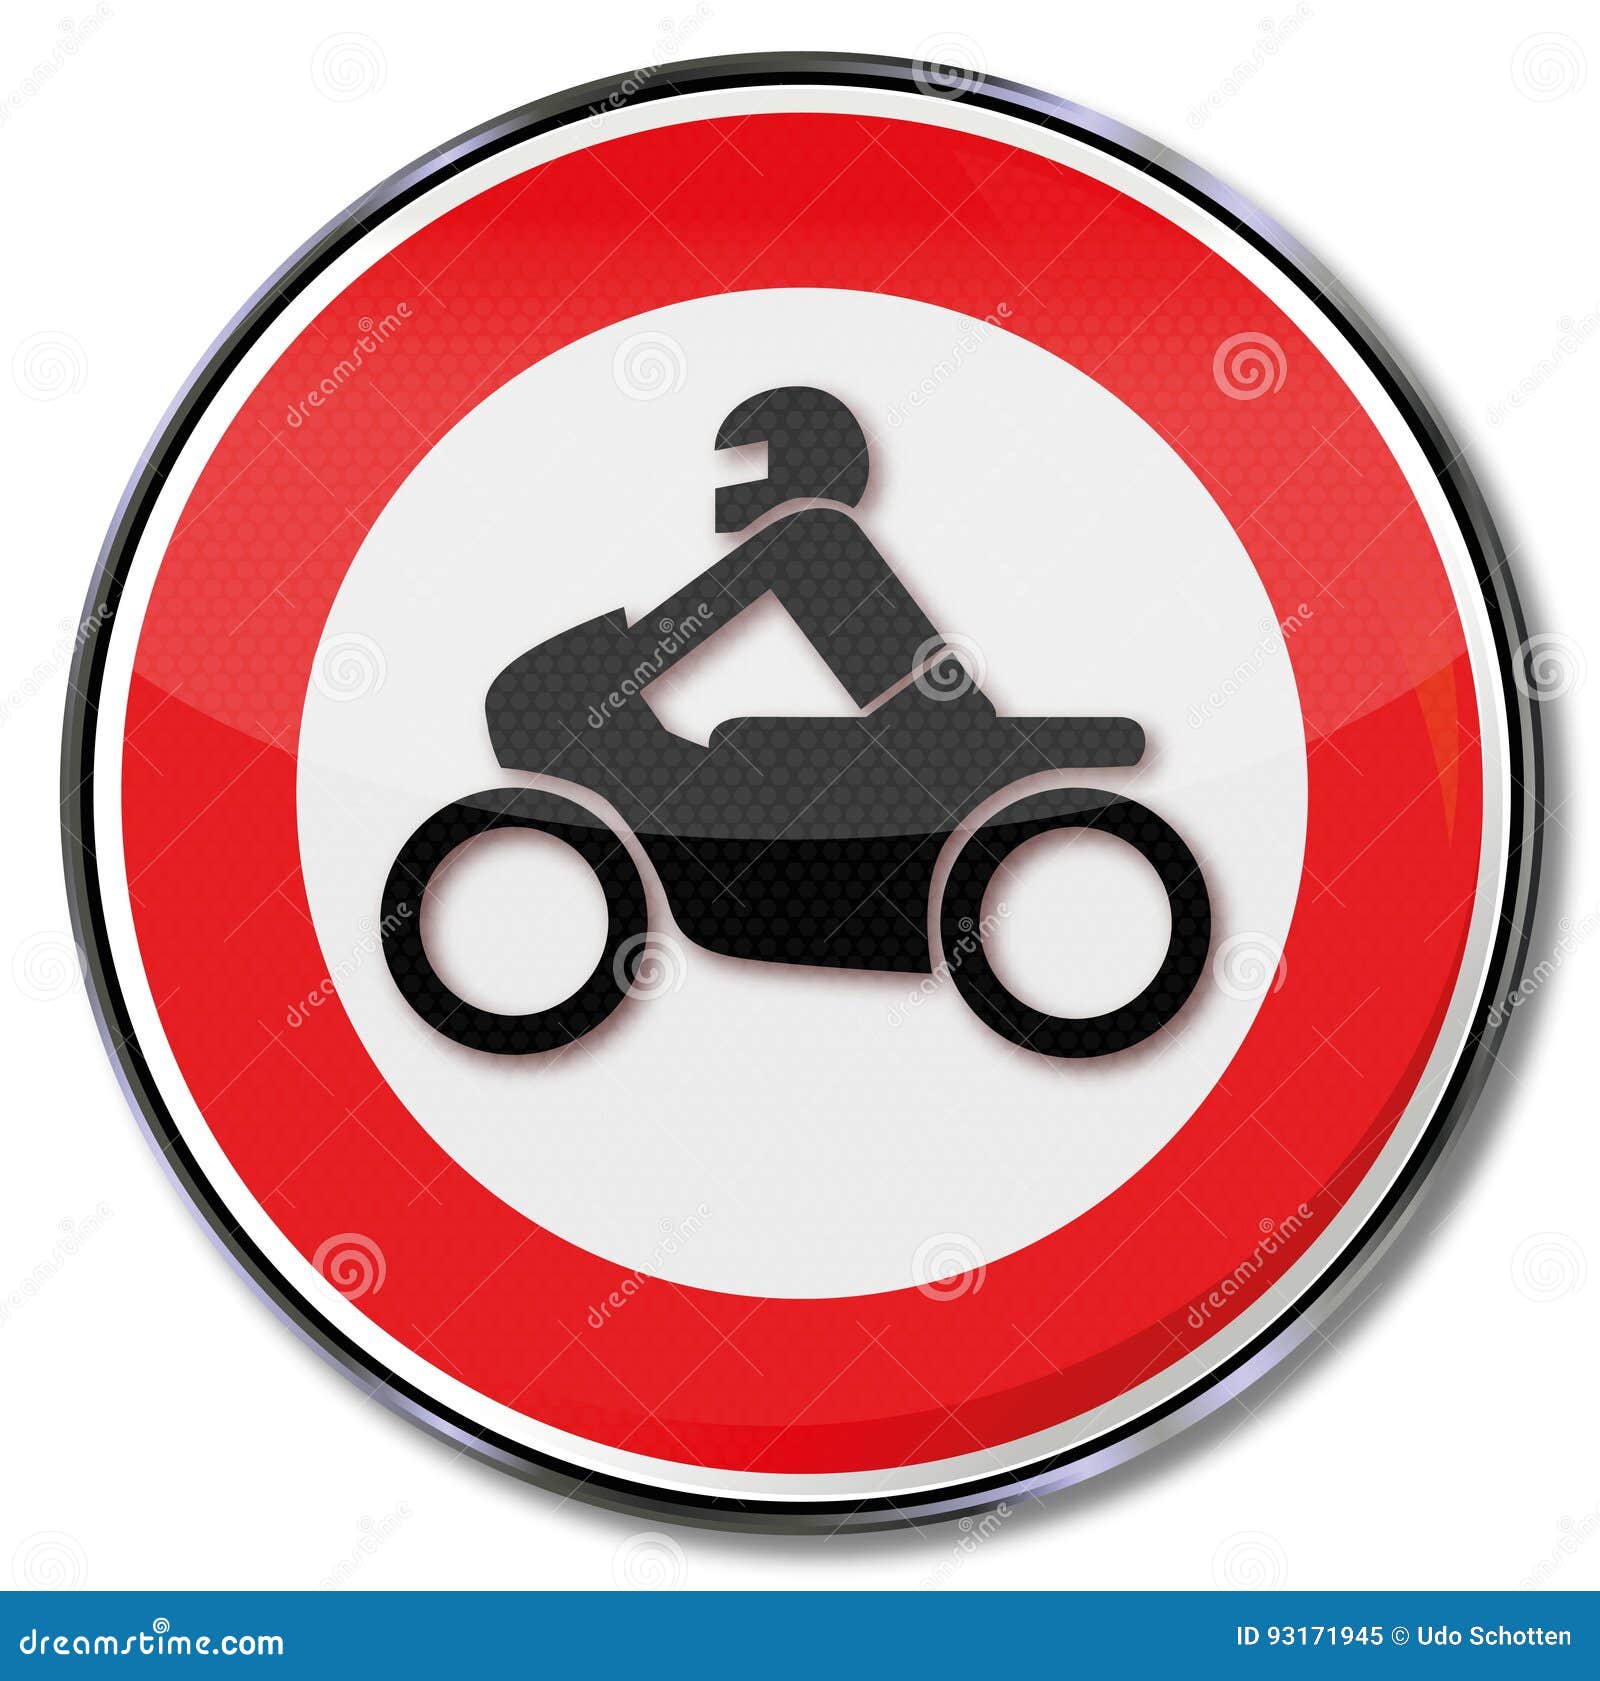 Ban Of Motorcycles Stock Vector Illustration Of Signs 93171945